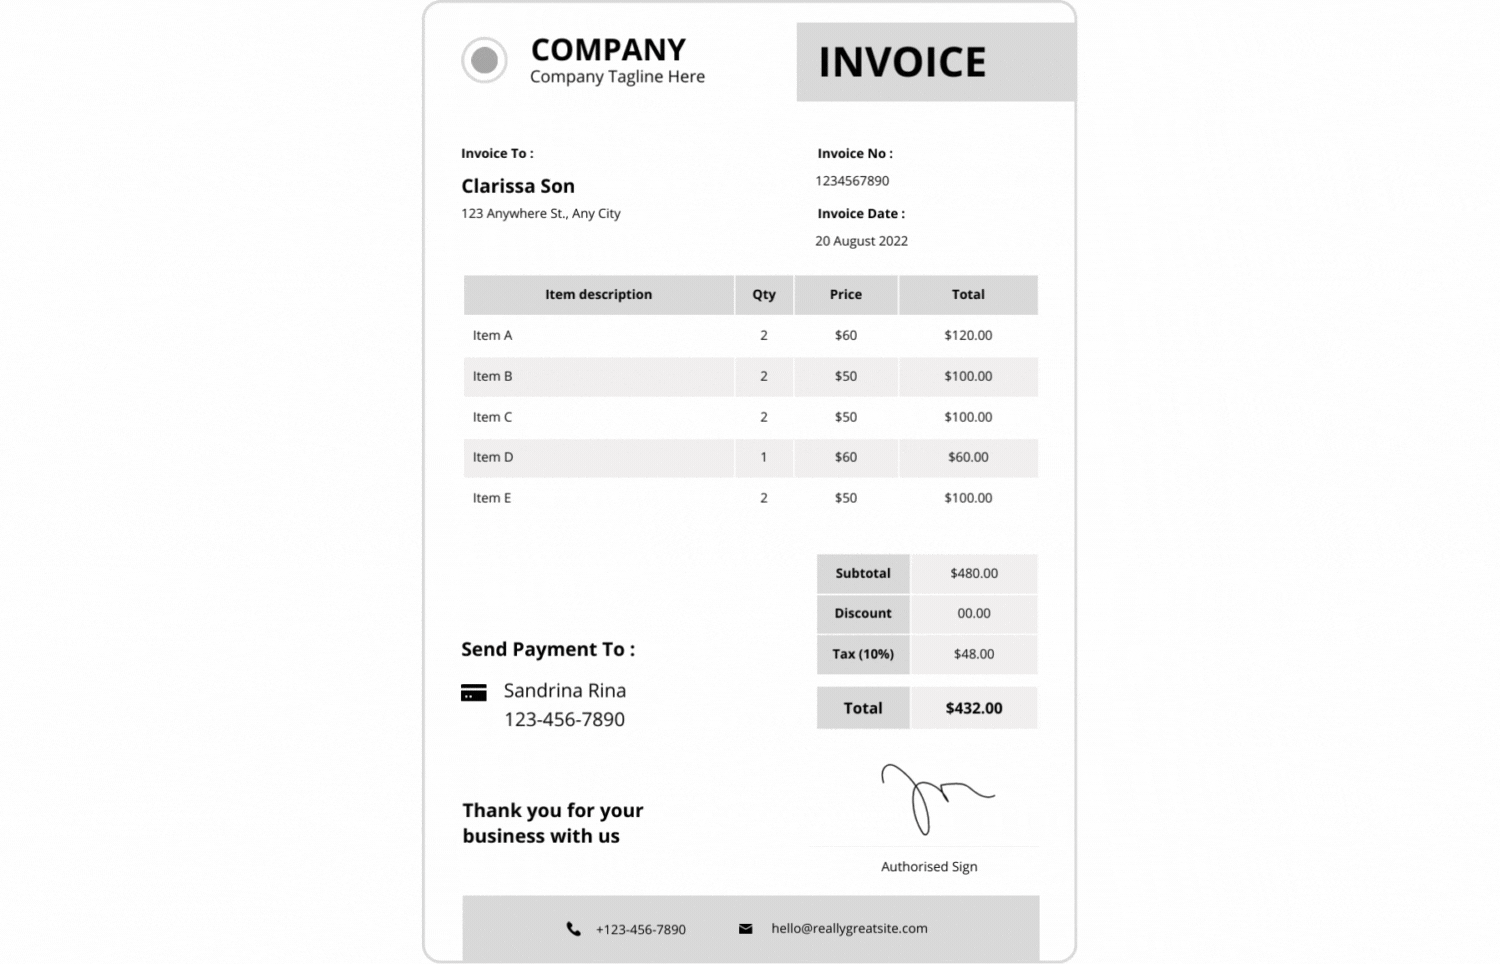 Processing of overseas supplier invoices with ProSpend